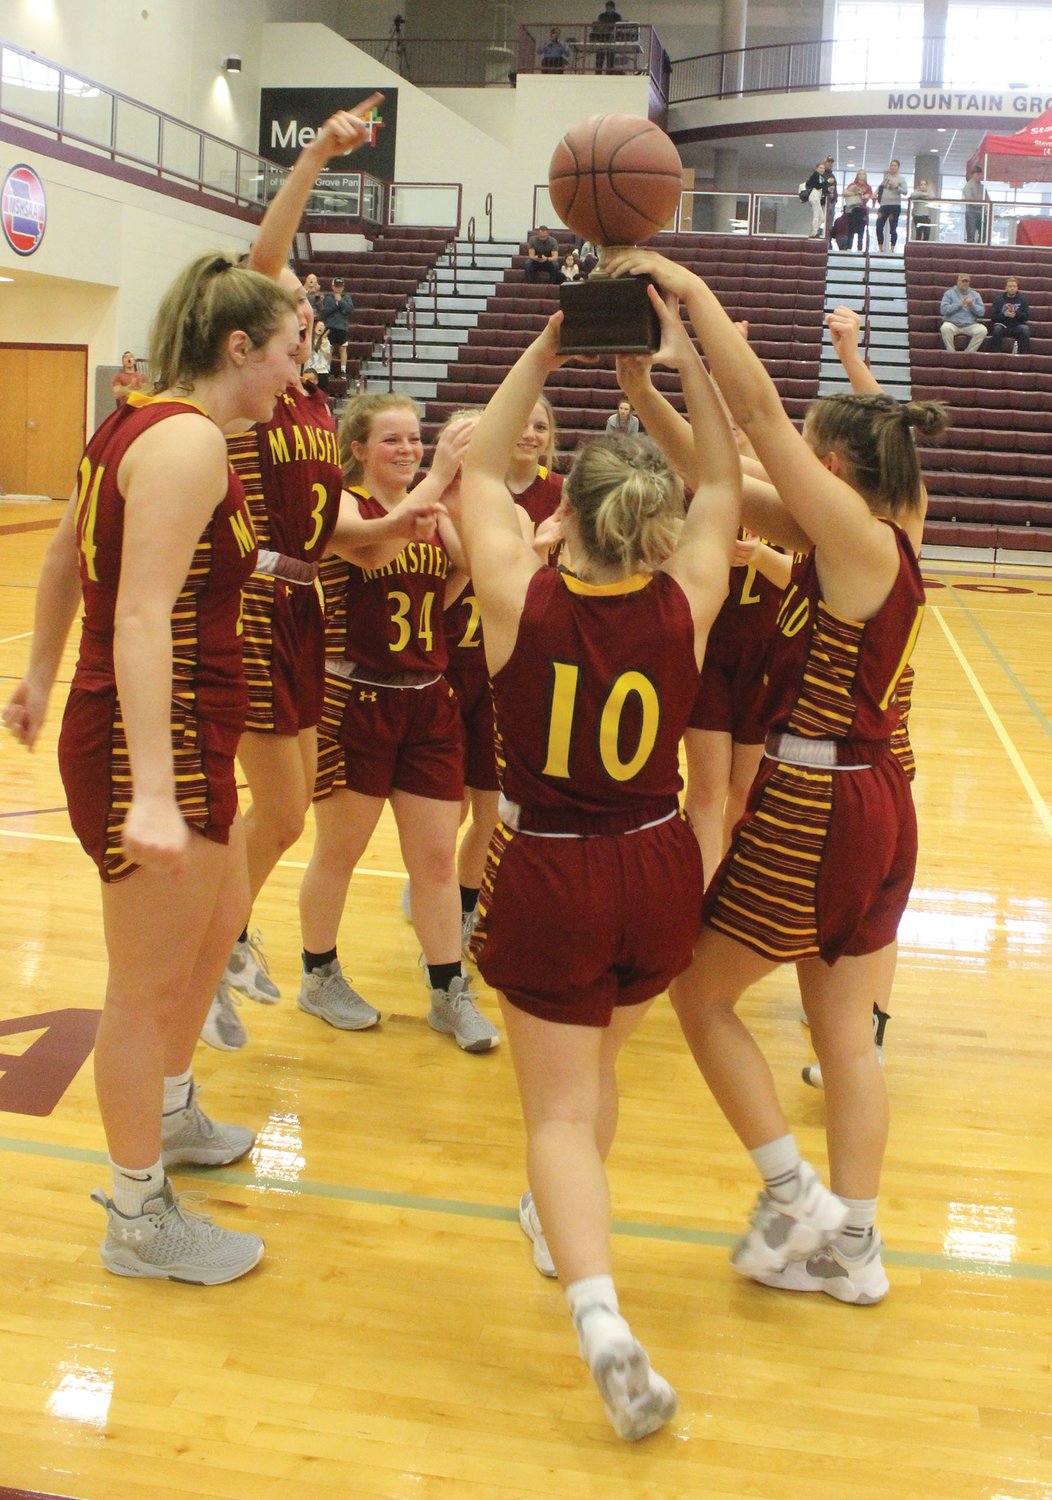 The Mansfield Lady Lions basketball team celebrates after defeating Salem to win their first ever State Farm Insurance Holiday Tournament in Mountain Grove.